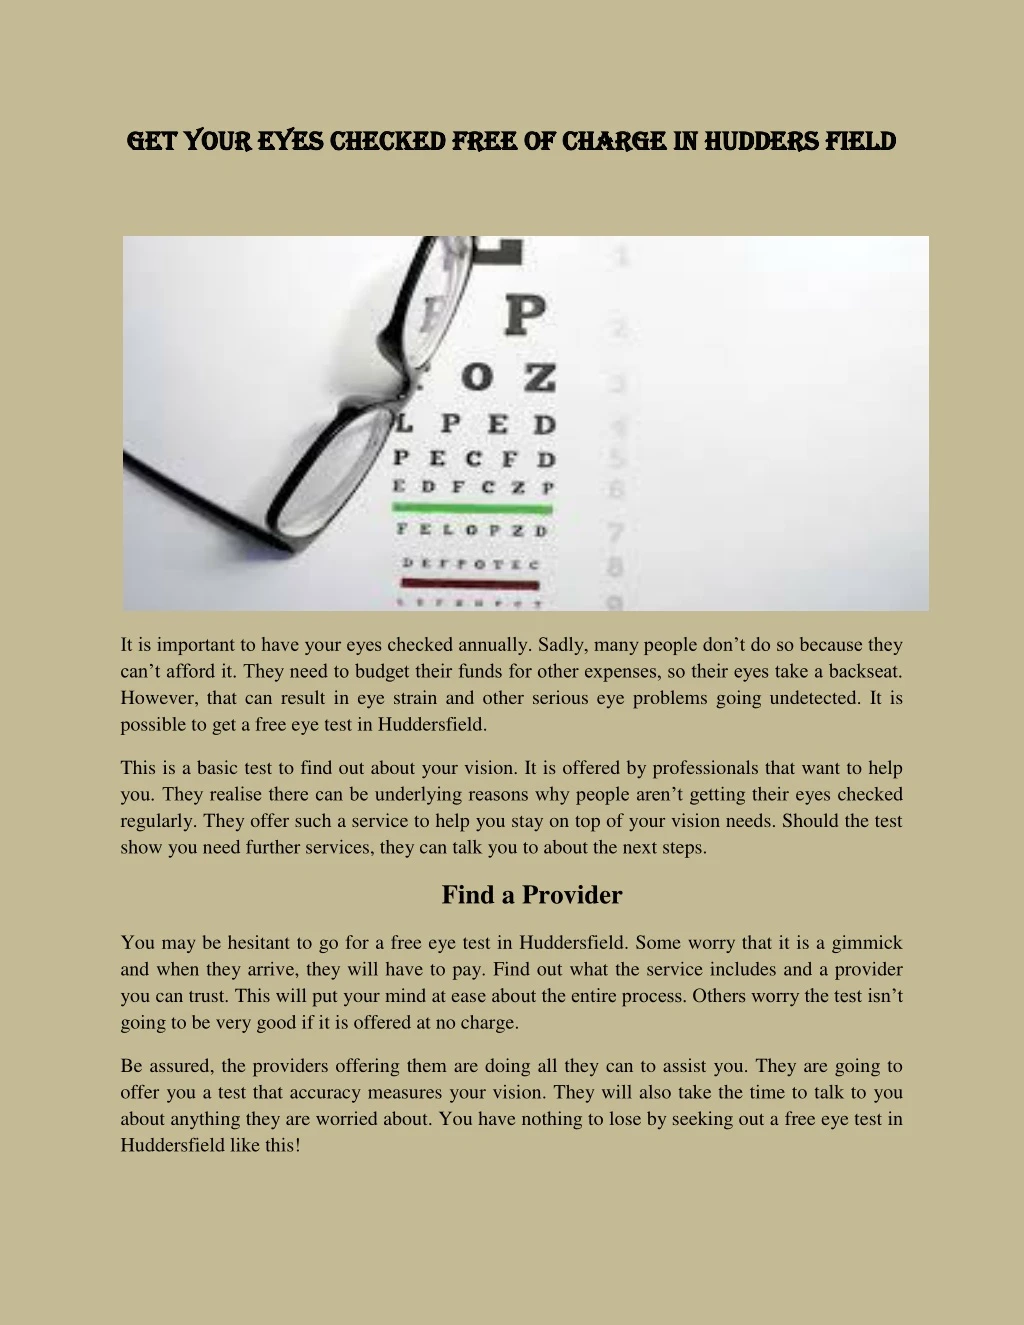 get your eyes checked free of charge in get your